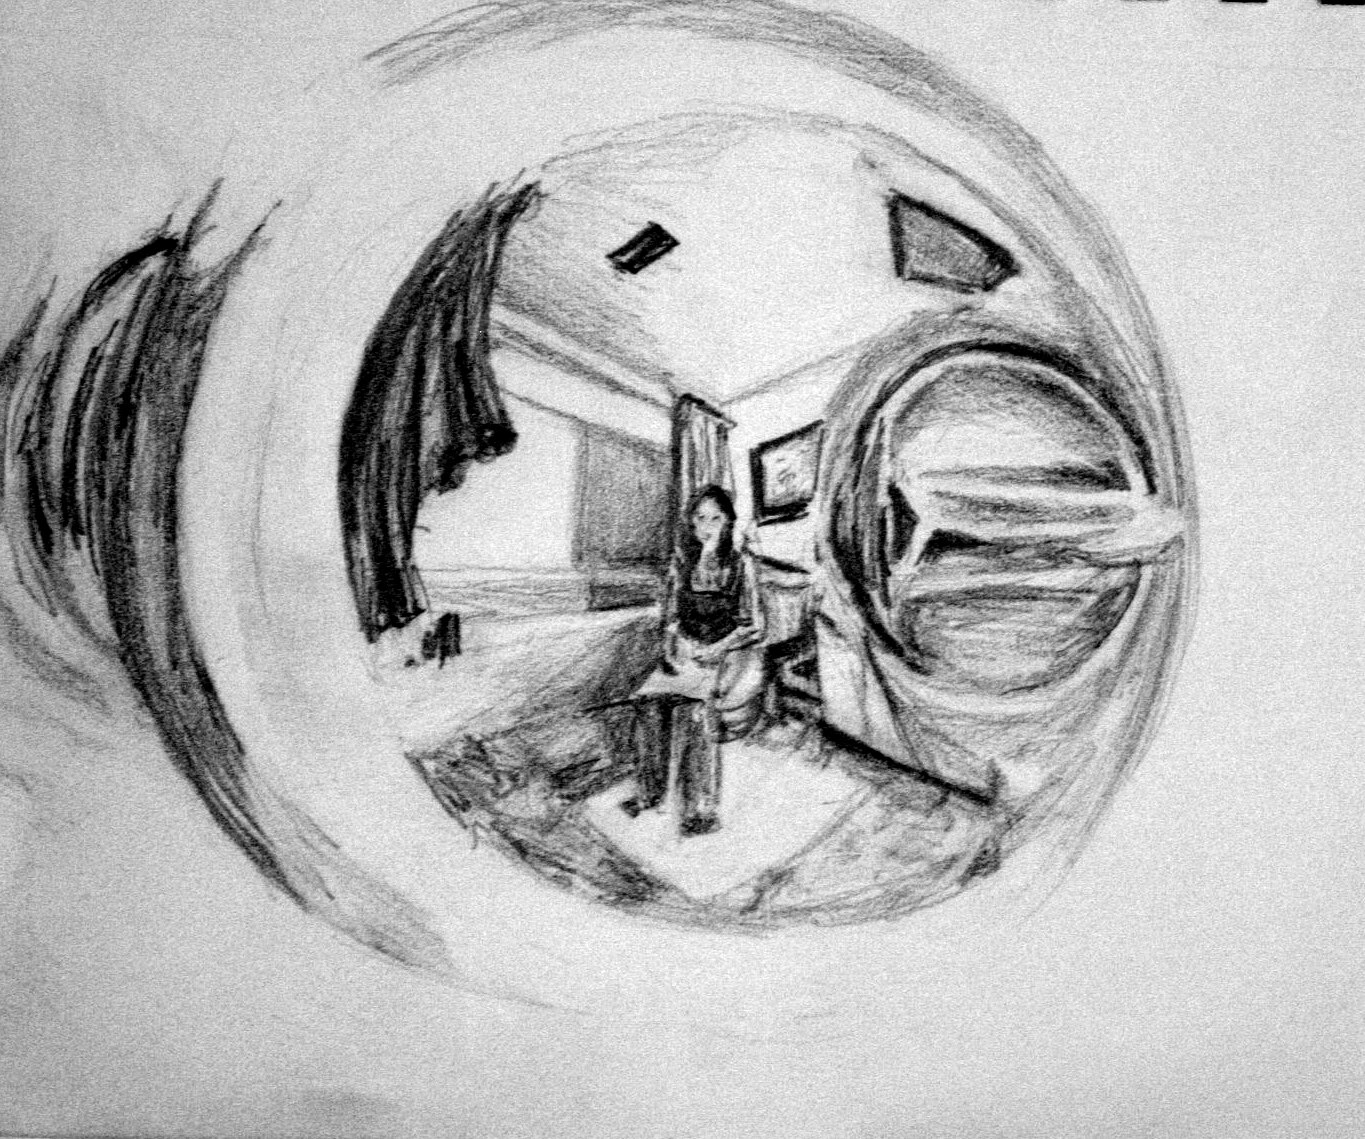 Jessica Siemens reflection 1 pencil on paper